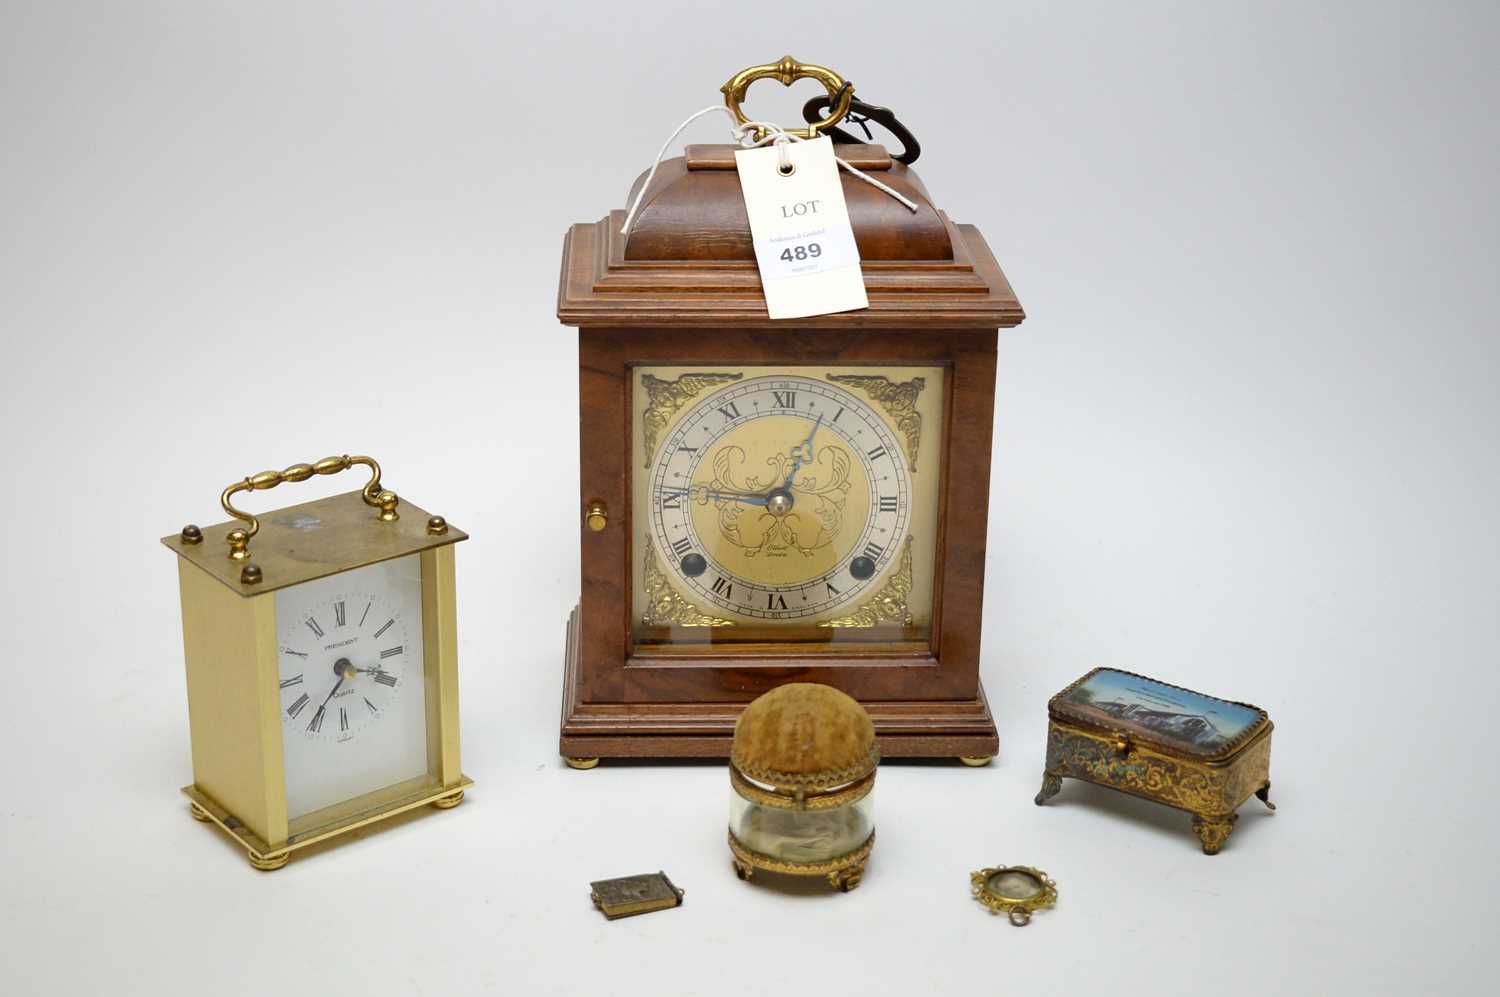 Lot 489 - Two clocks and other items